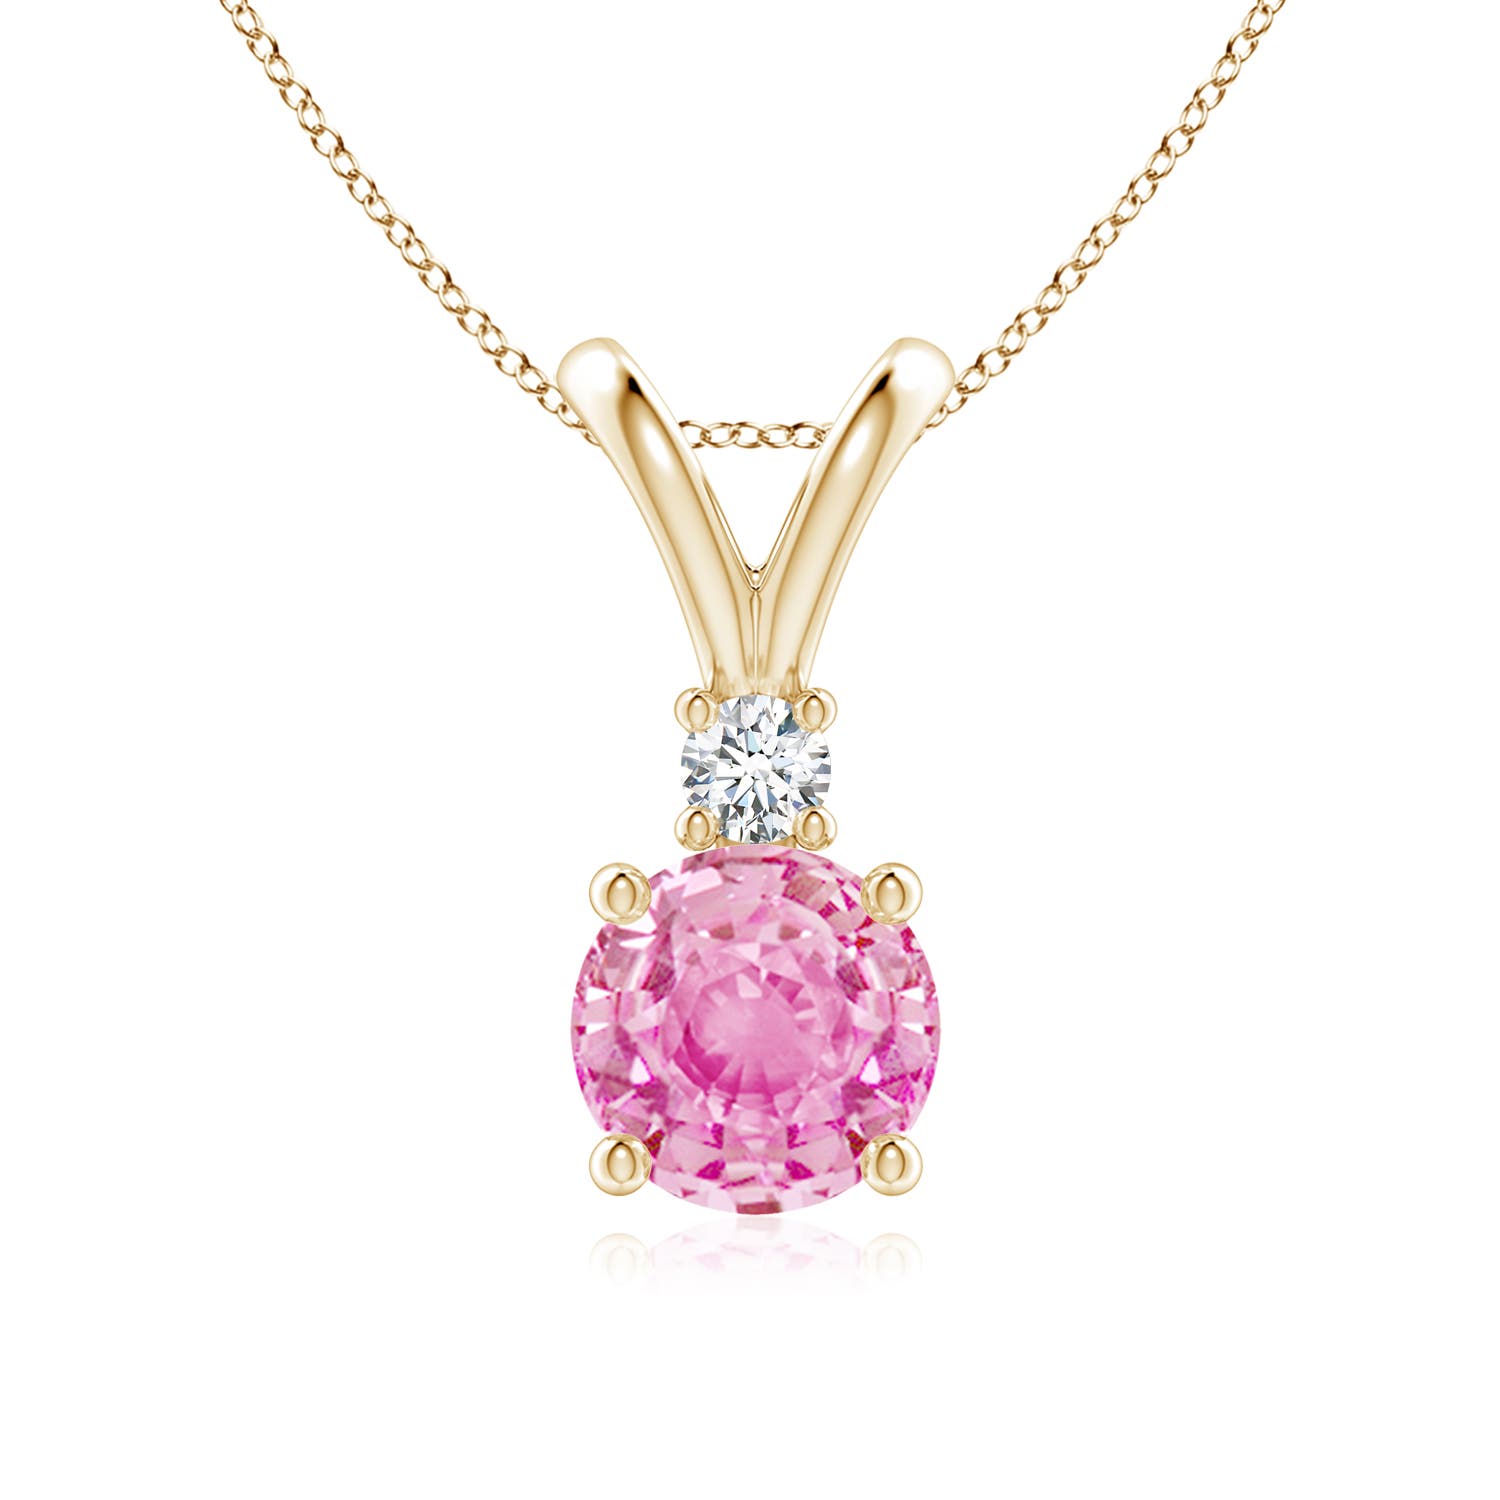 A - Pink Sapphire / 1.67 CT / 14 KT Yellow Gold